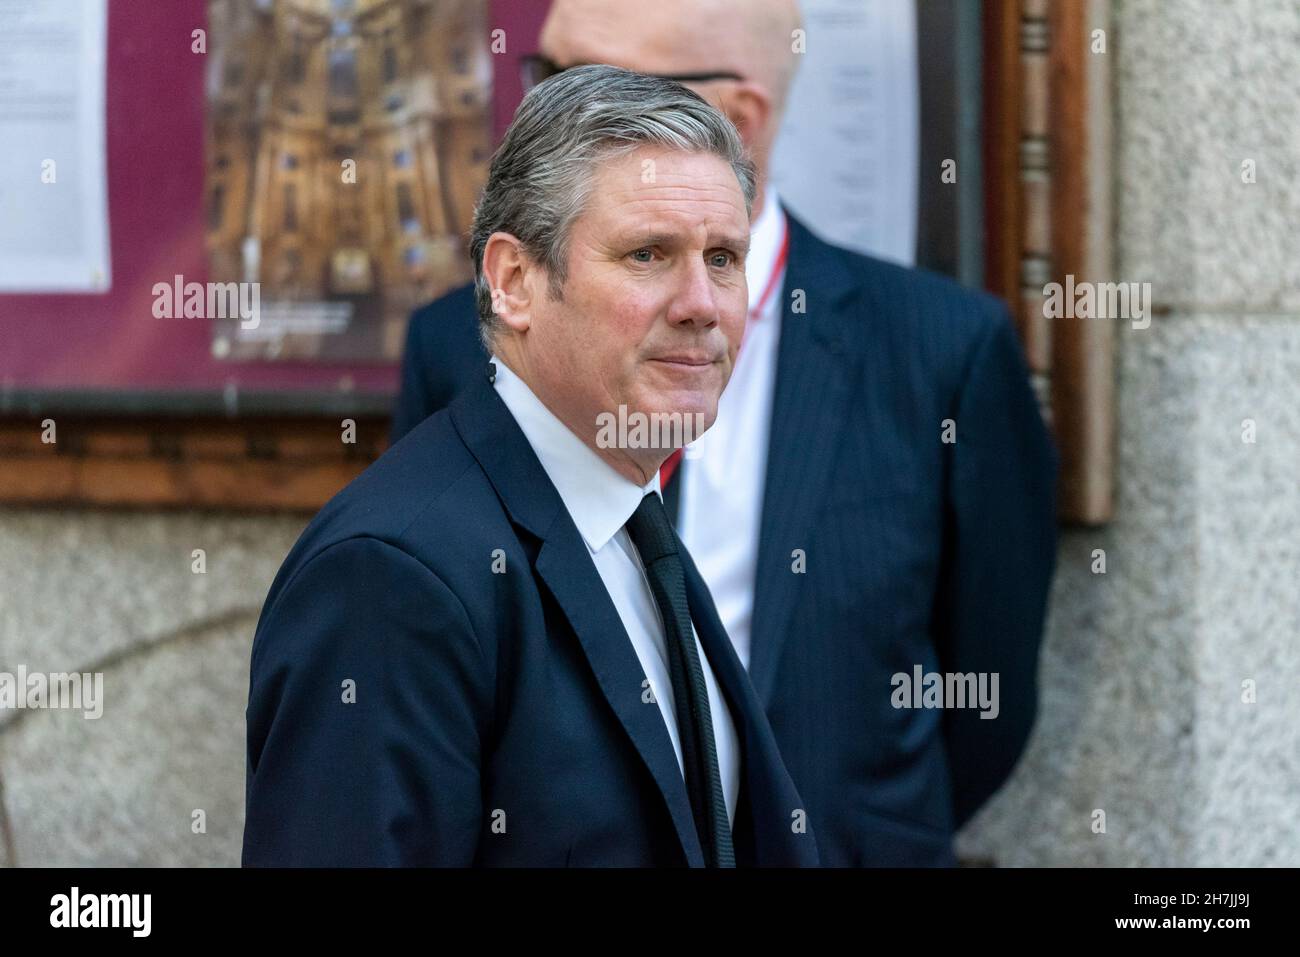 Labour leader MP Keir Starmer arriving for the funeral service requiem mass for murdered MP Sir David Amess at Westminster Cathedral, London, UK Stock Photo